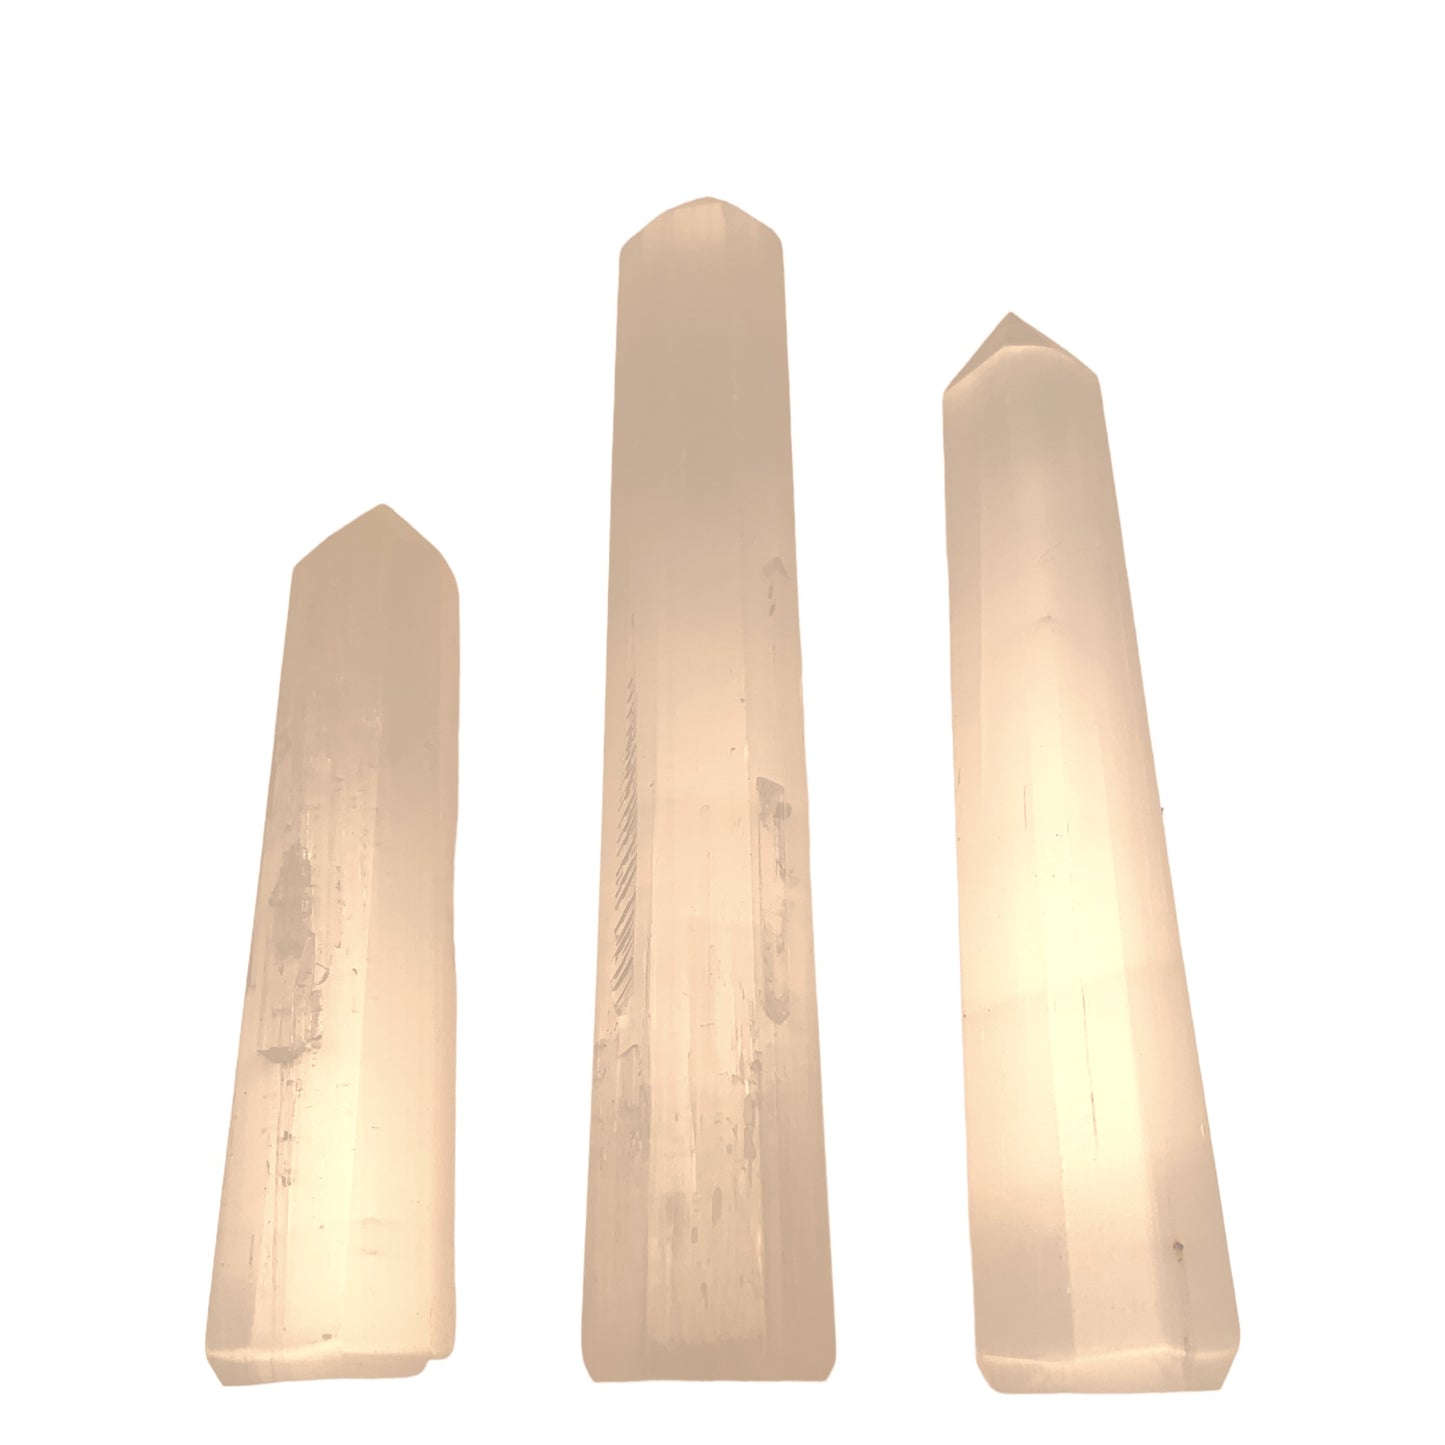 SELENITE - Polished Points - 4.5 to 5.5 inches - Price per gram per piece